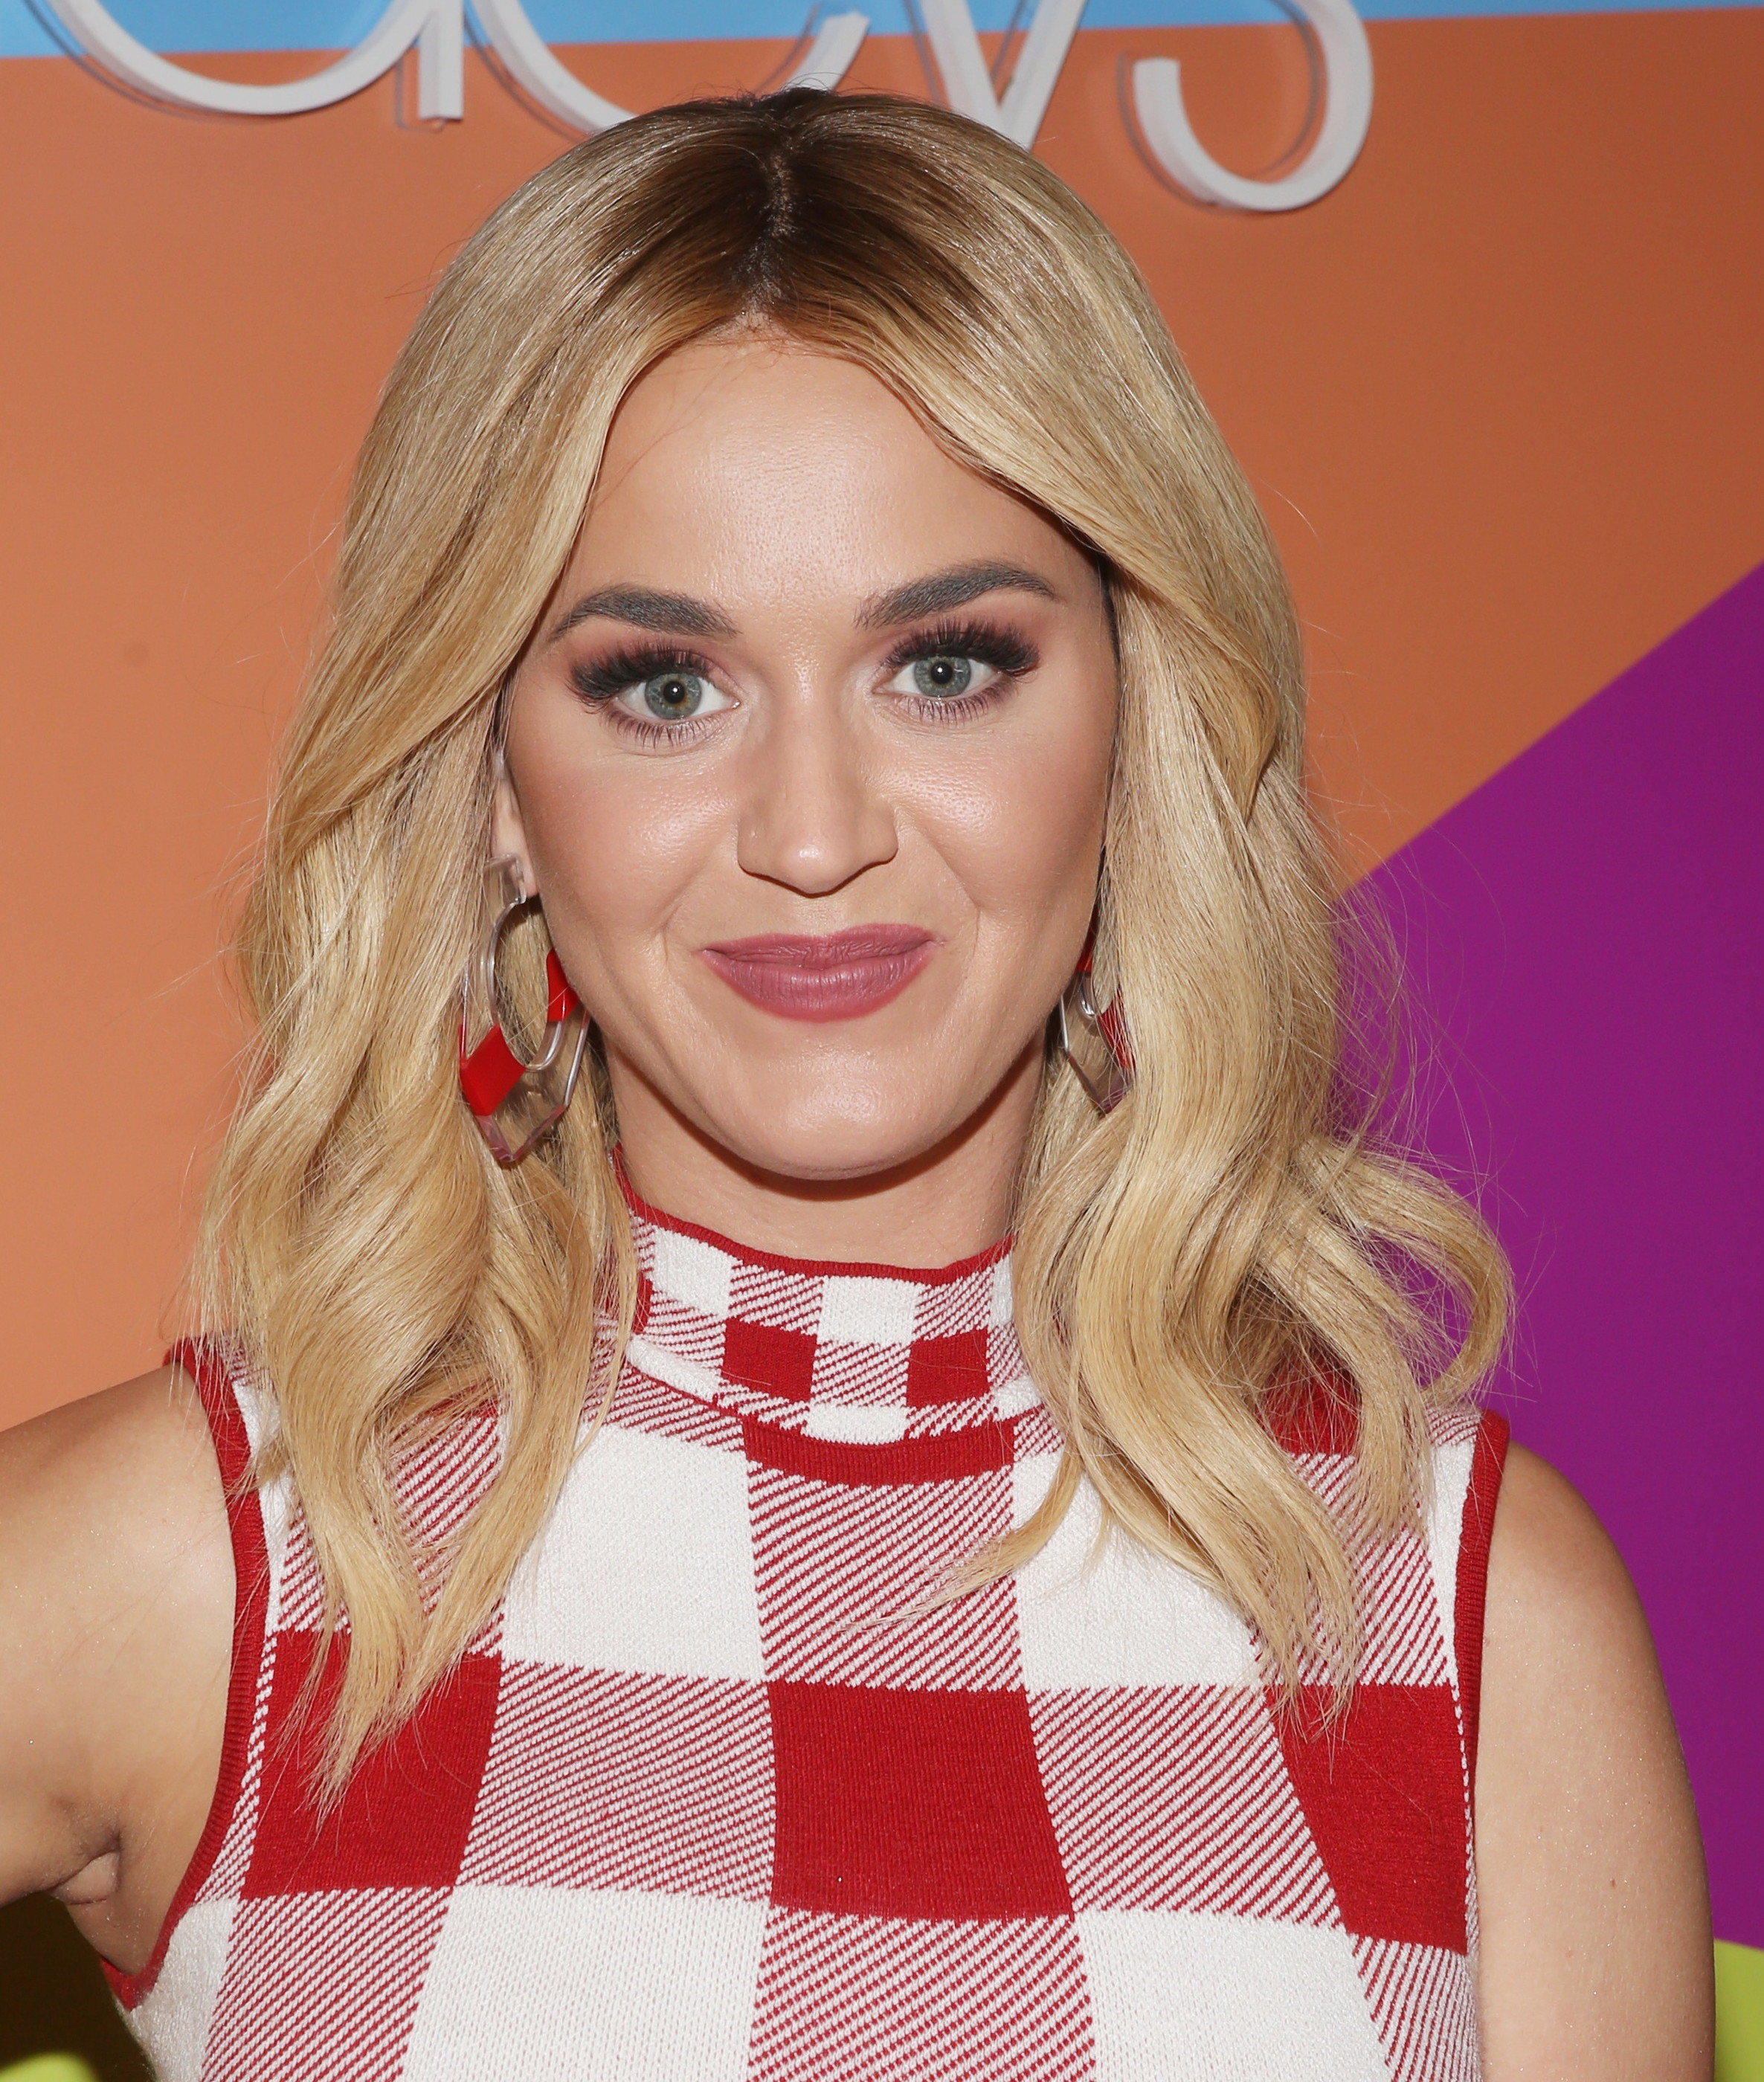 Katy Perry unveils her new shoe collection at Macy's